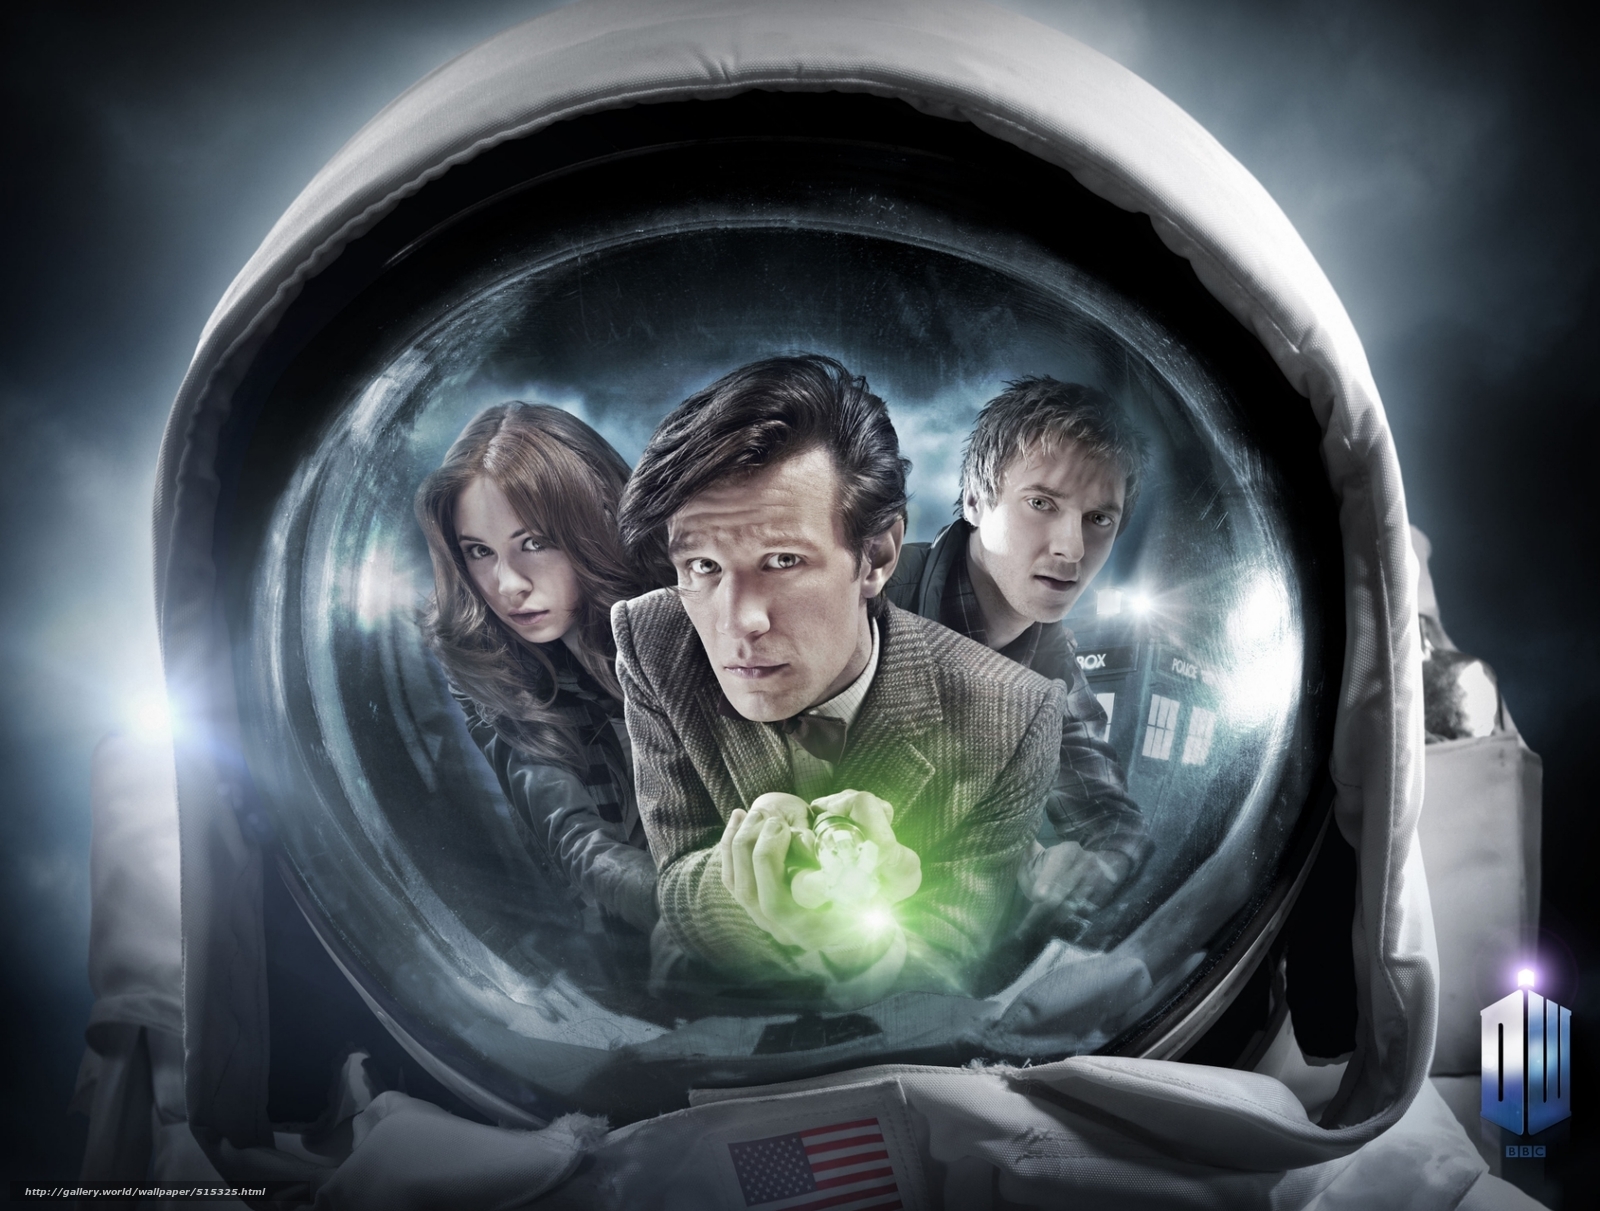 Download Wallpaper Series, Doctor Who, Reflection, - Impossible Astronaut Day Of The Moon - HD Wallpaper 